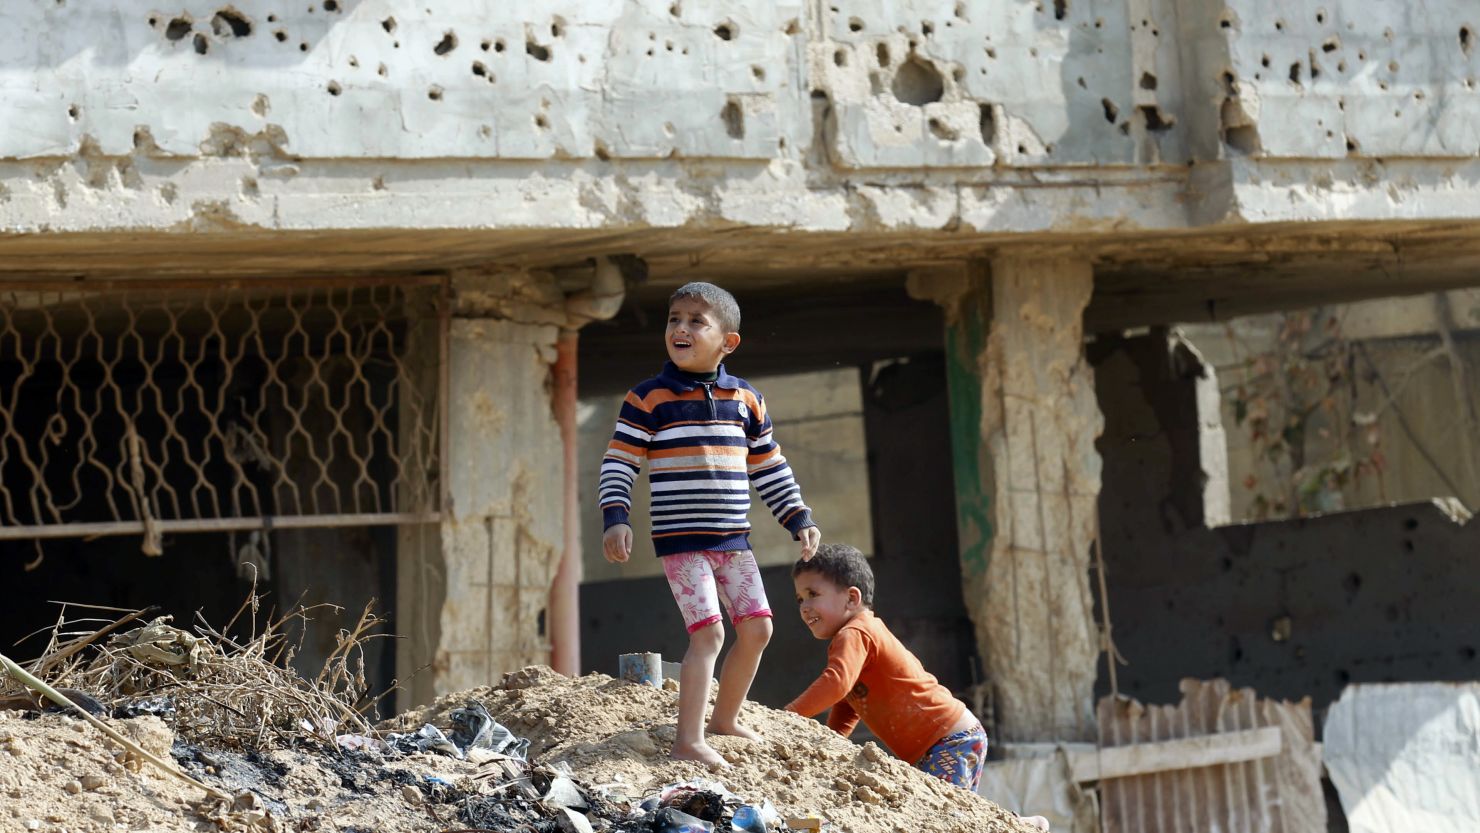 Palestinian children play in front of a house in Gaza in November that was damaged in an Israeli army operation in 2012.